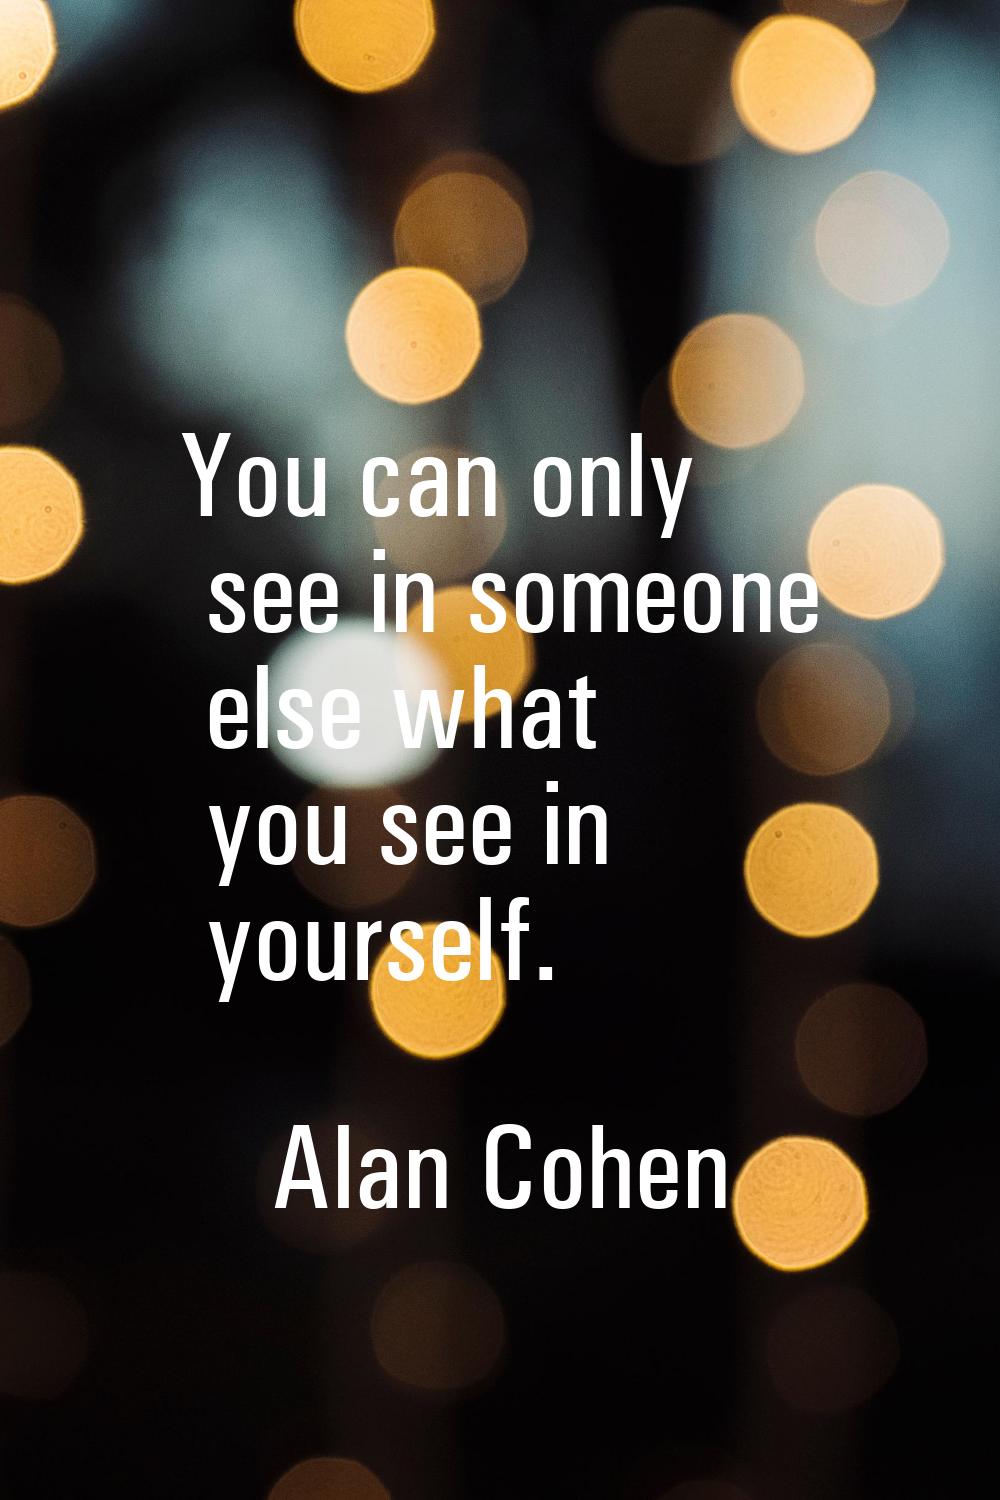 You can only see in someone else what you see in yourself.